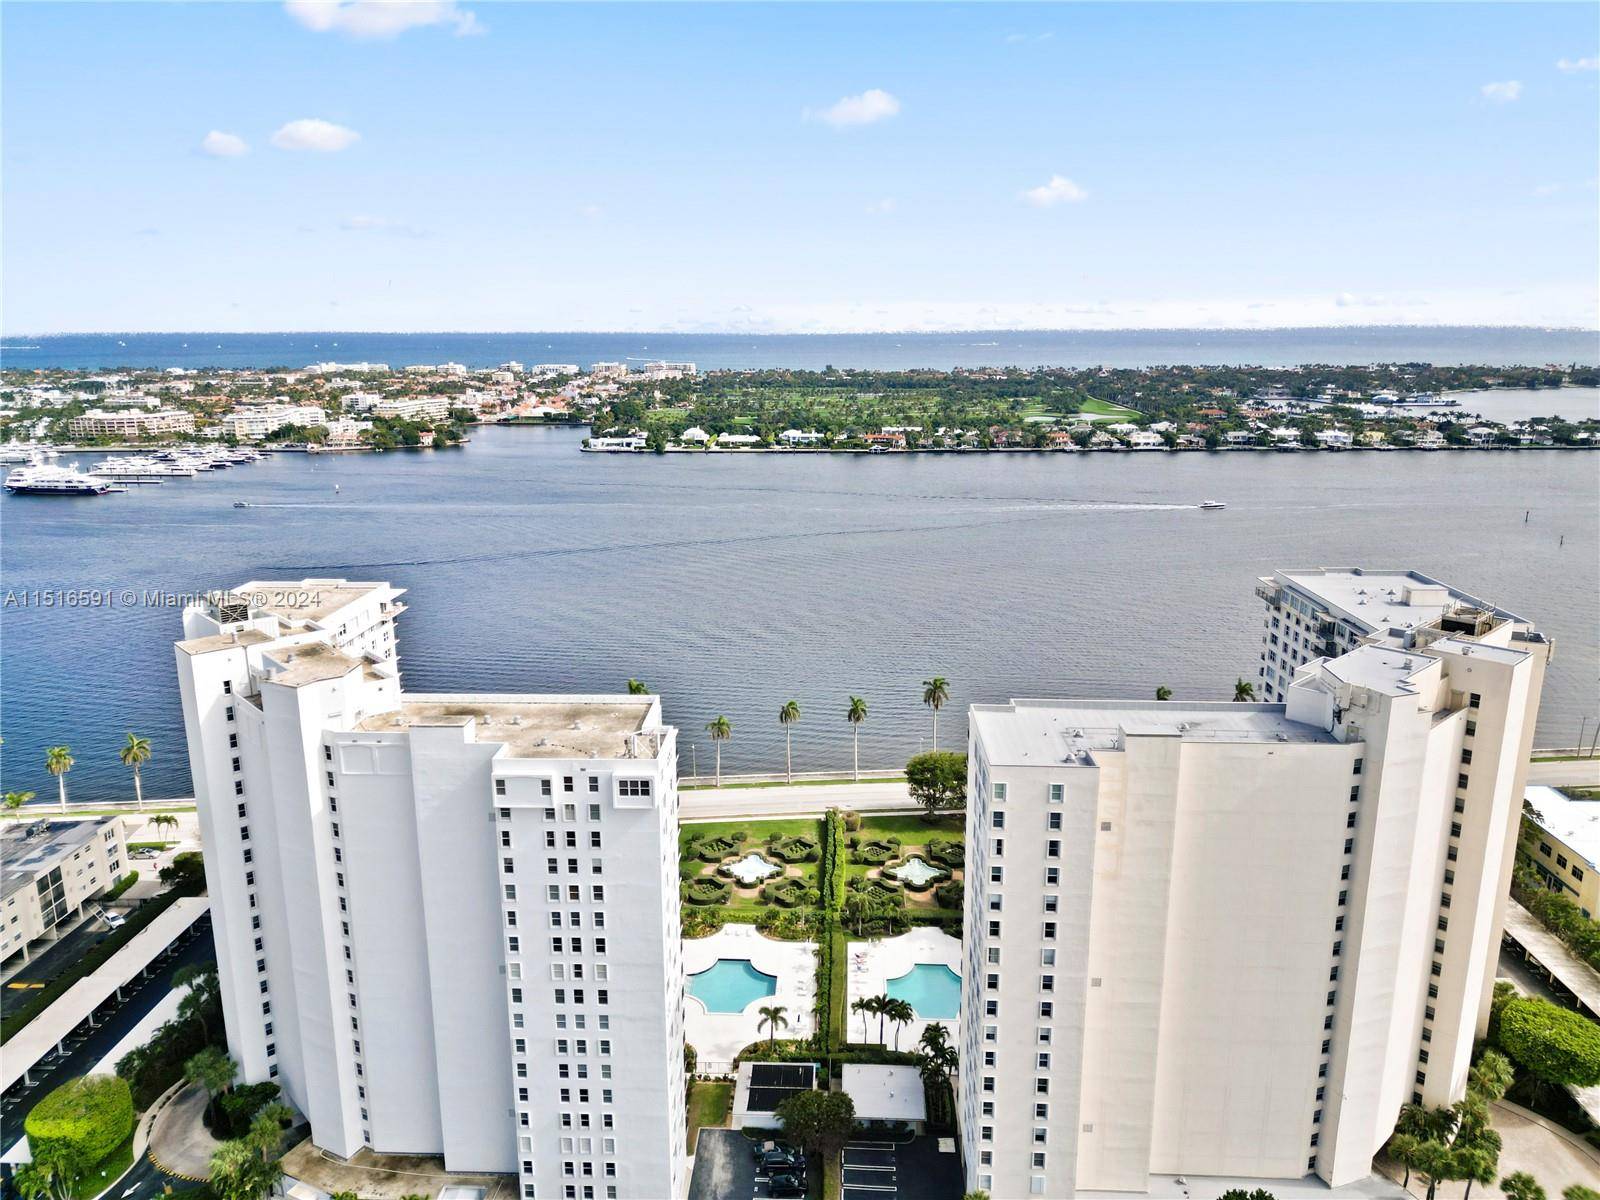 Immerse yourself in the stunning Intracoastal views.